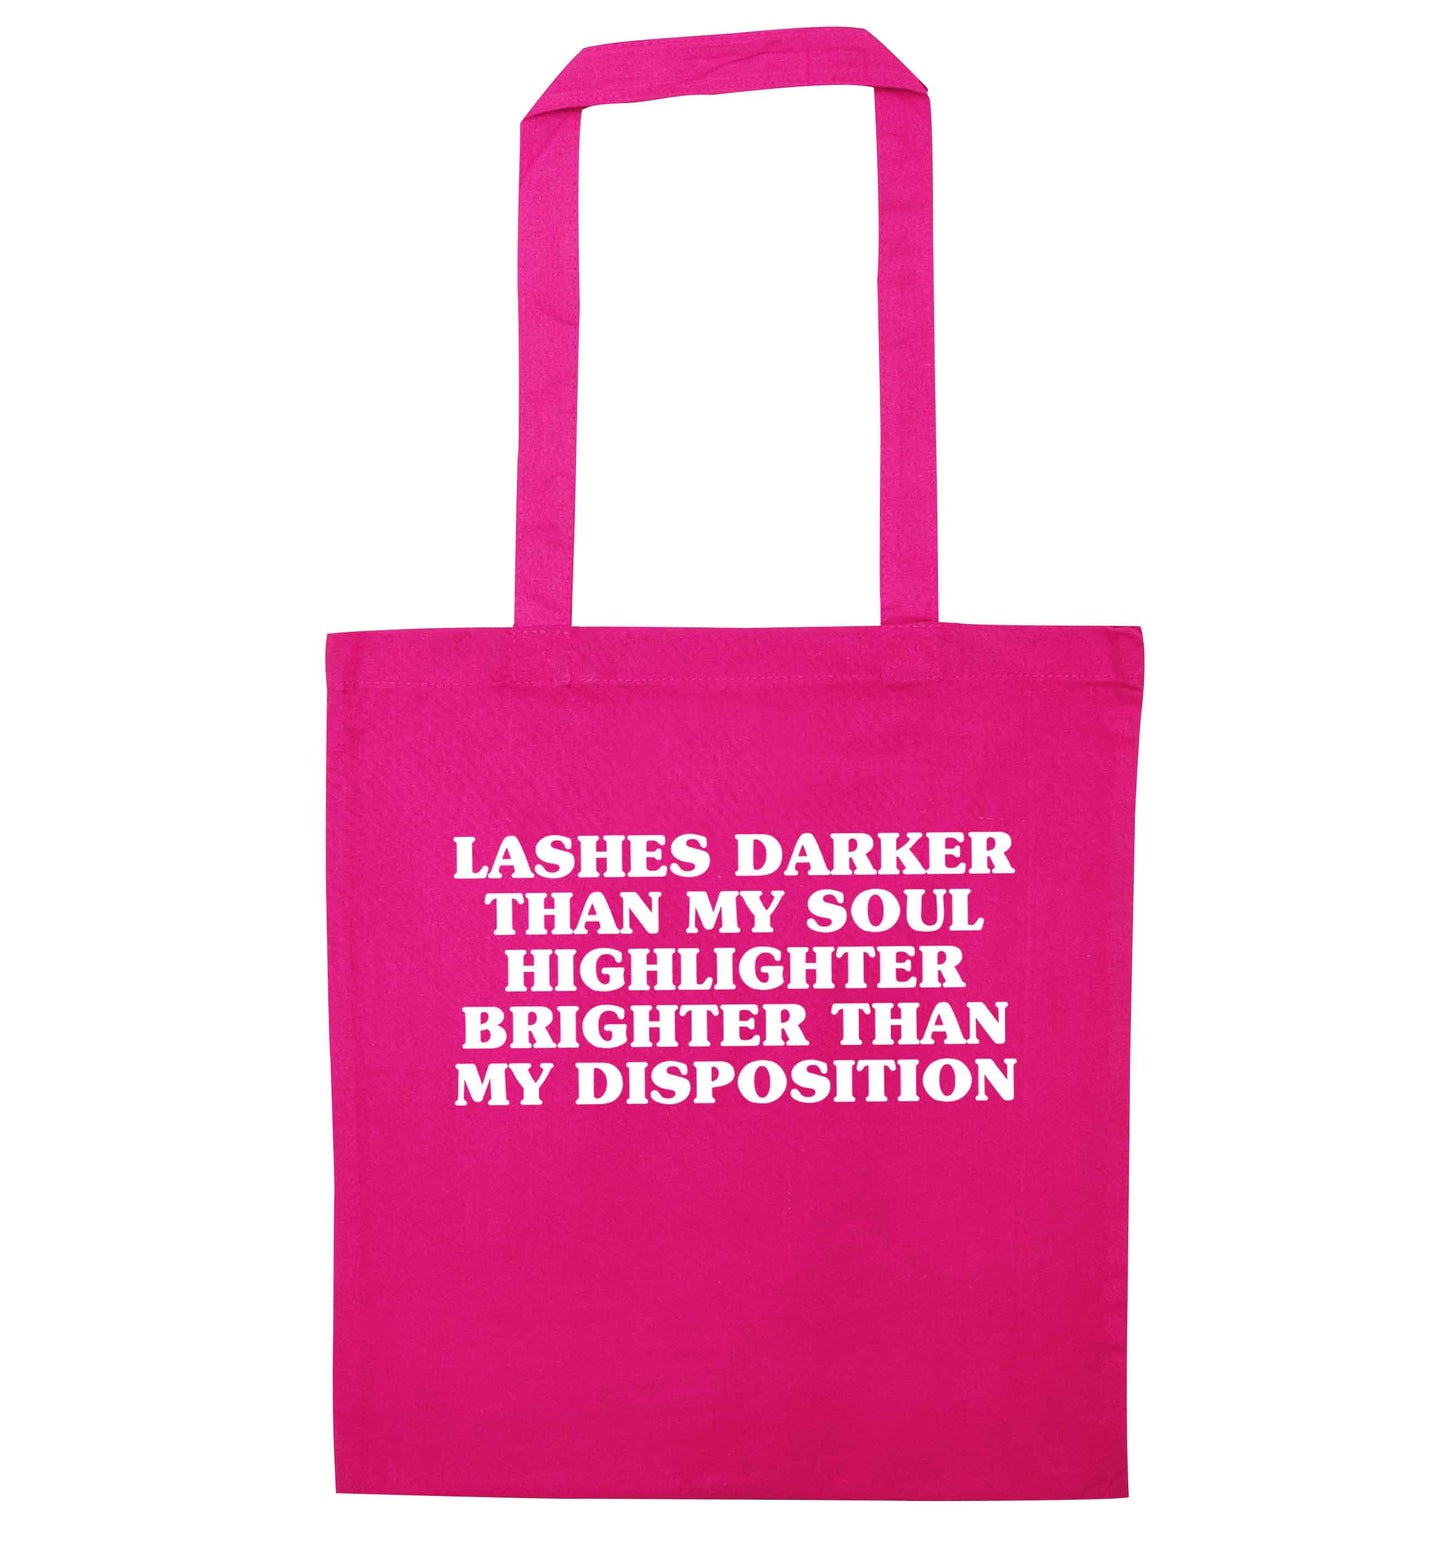 Lashes darker than my soul, highlighter brighter than my disposition pink tote bag